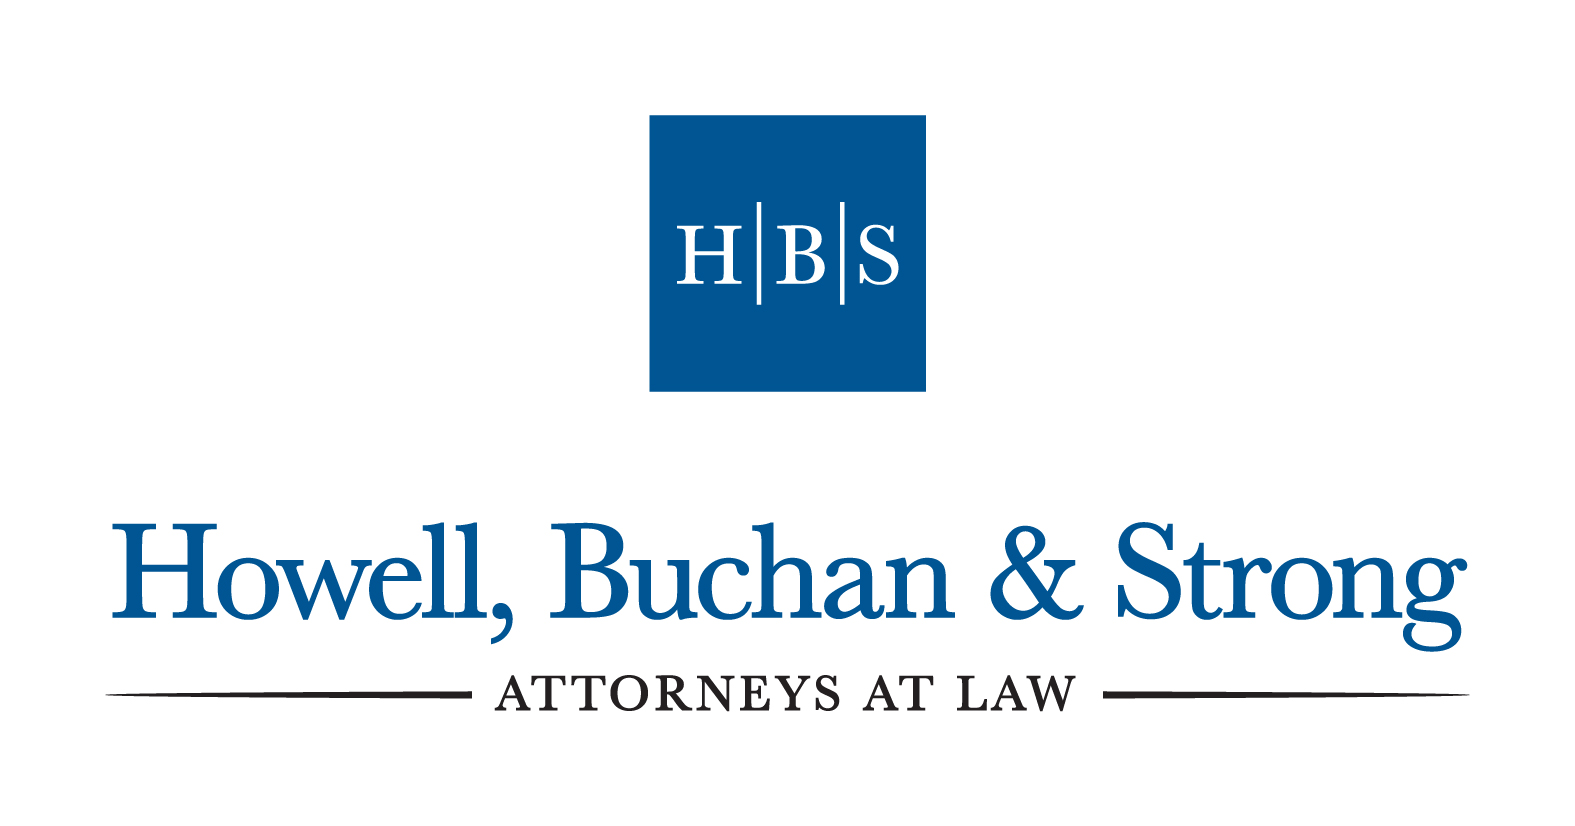 Howell, Buchan & Strong Attorneys at Law